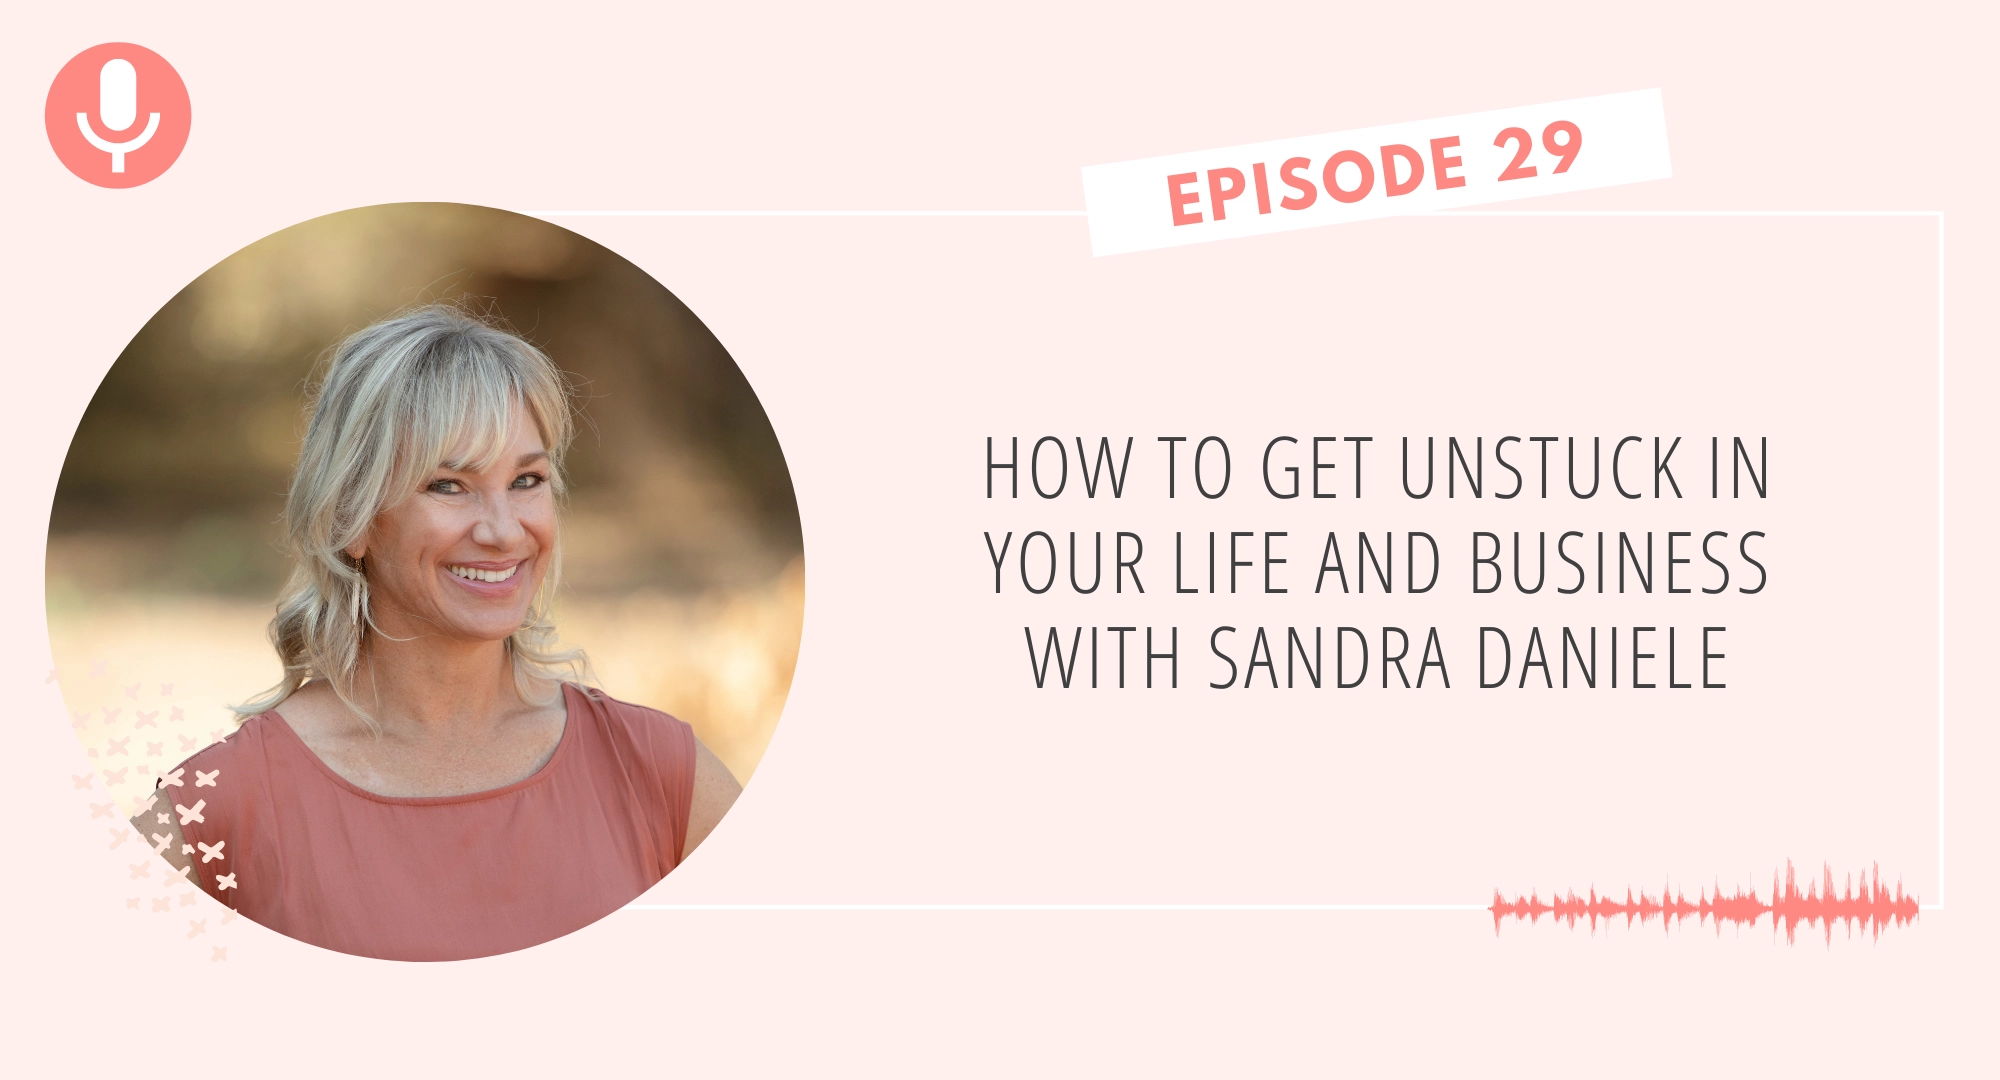 How to Get Unstuck in Your Life and Business with Sandra Daniele